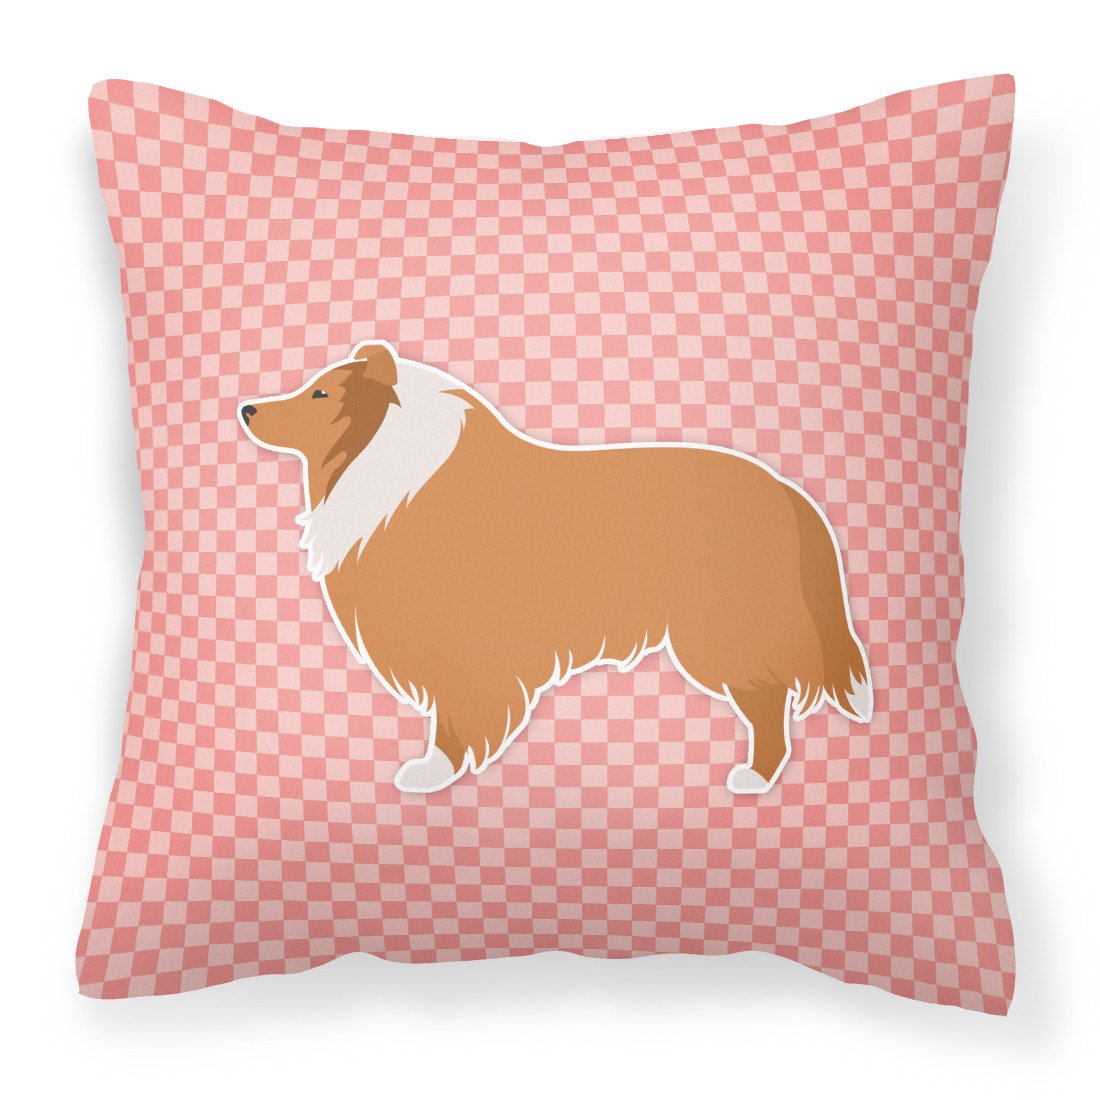 Collie Checkerboard Pink Fabric Decorative Pillow BB3616PW1818 by Caroline's Treasures